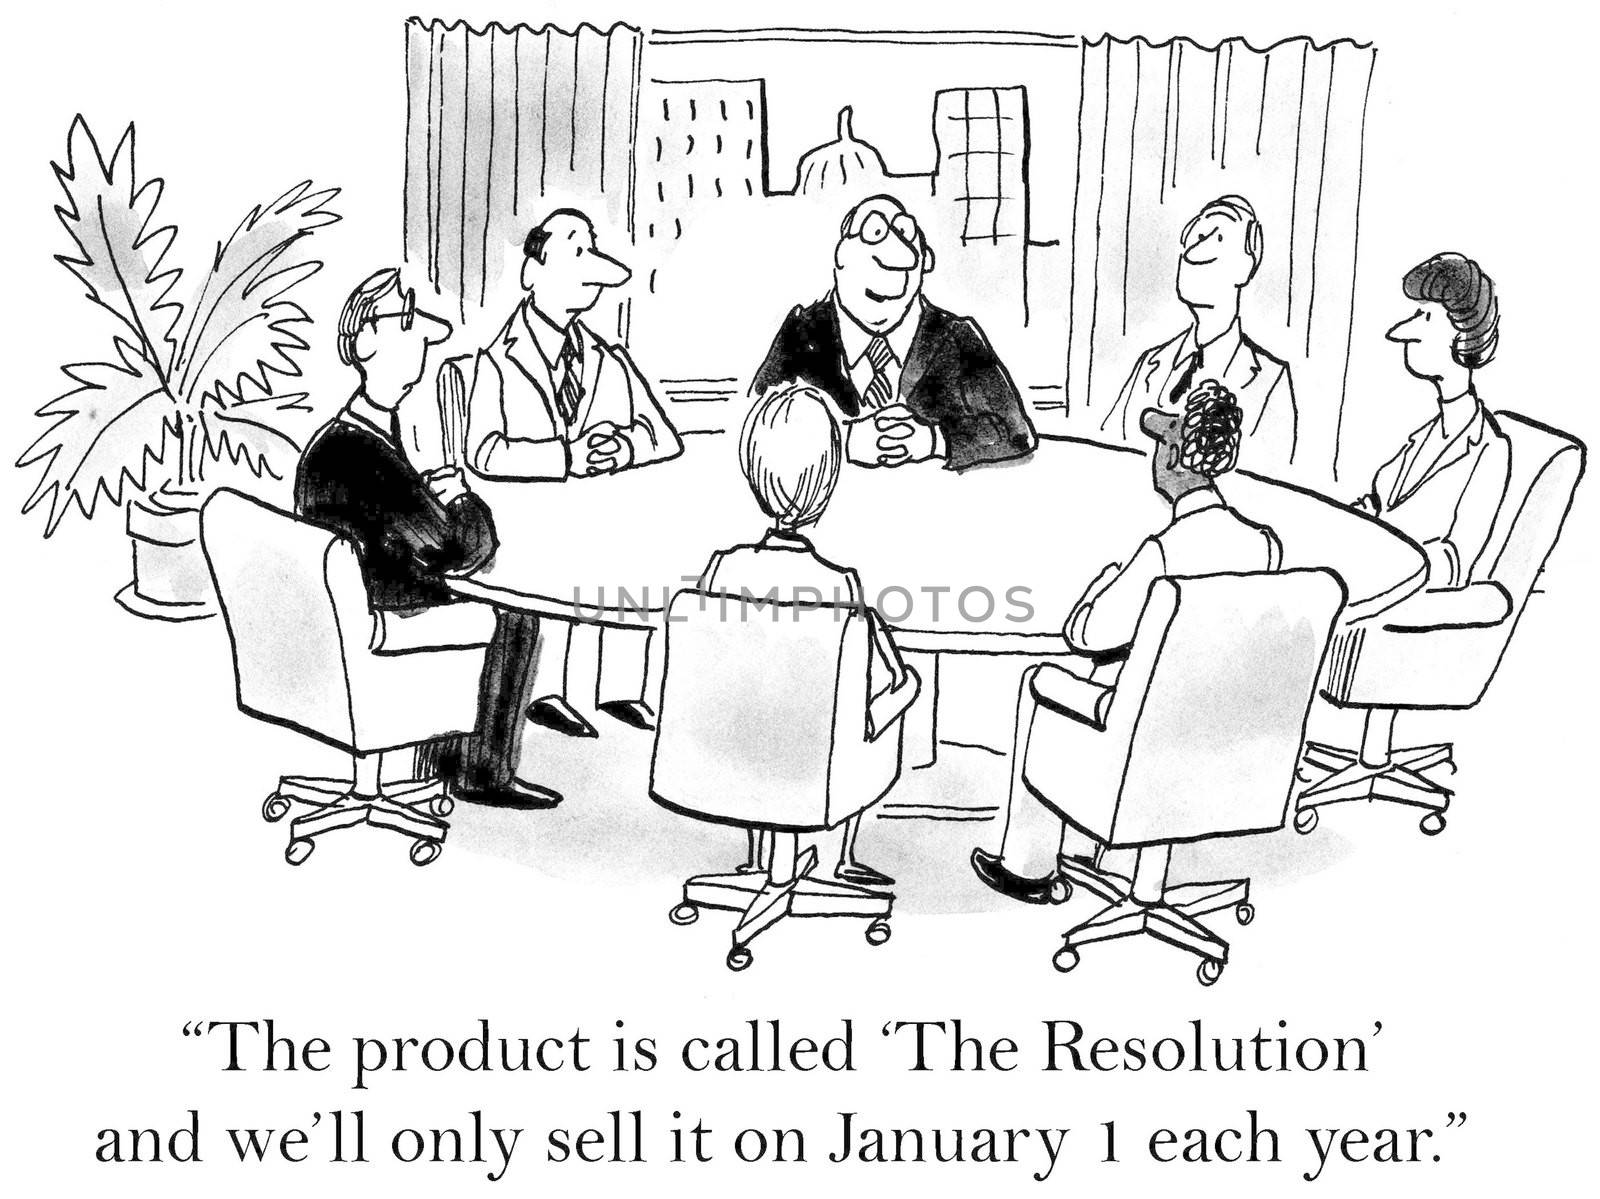 "The product is called 'The Resolution' and we'll only sell it on January 1 each year?"